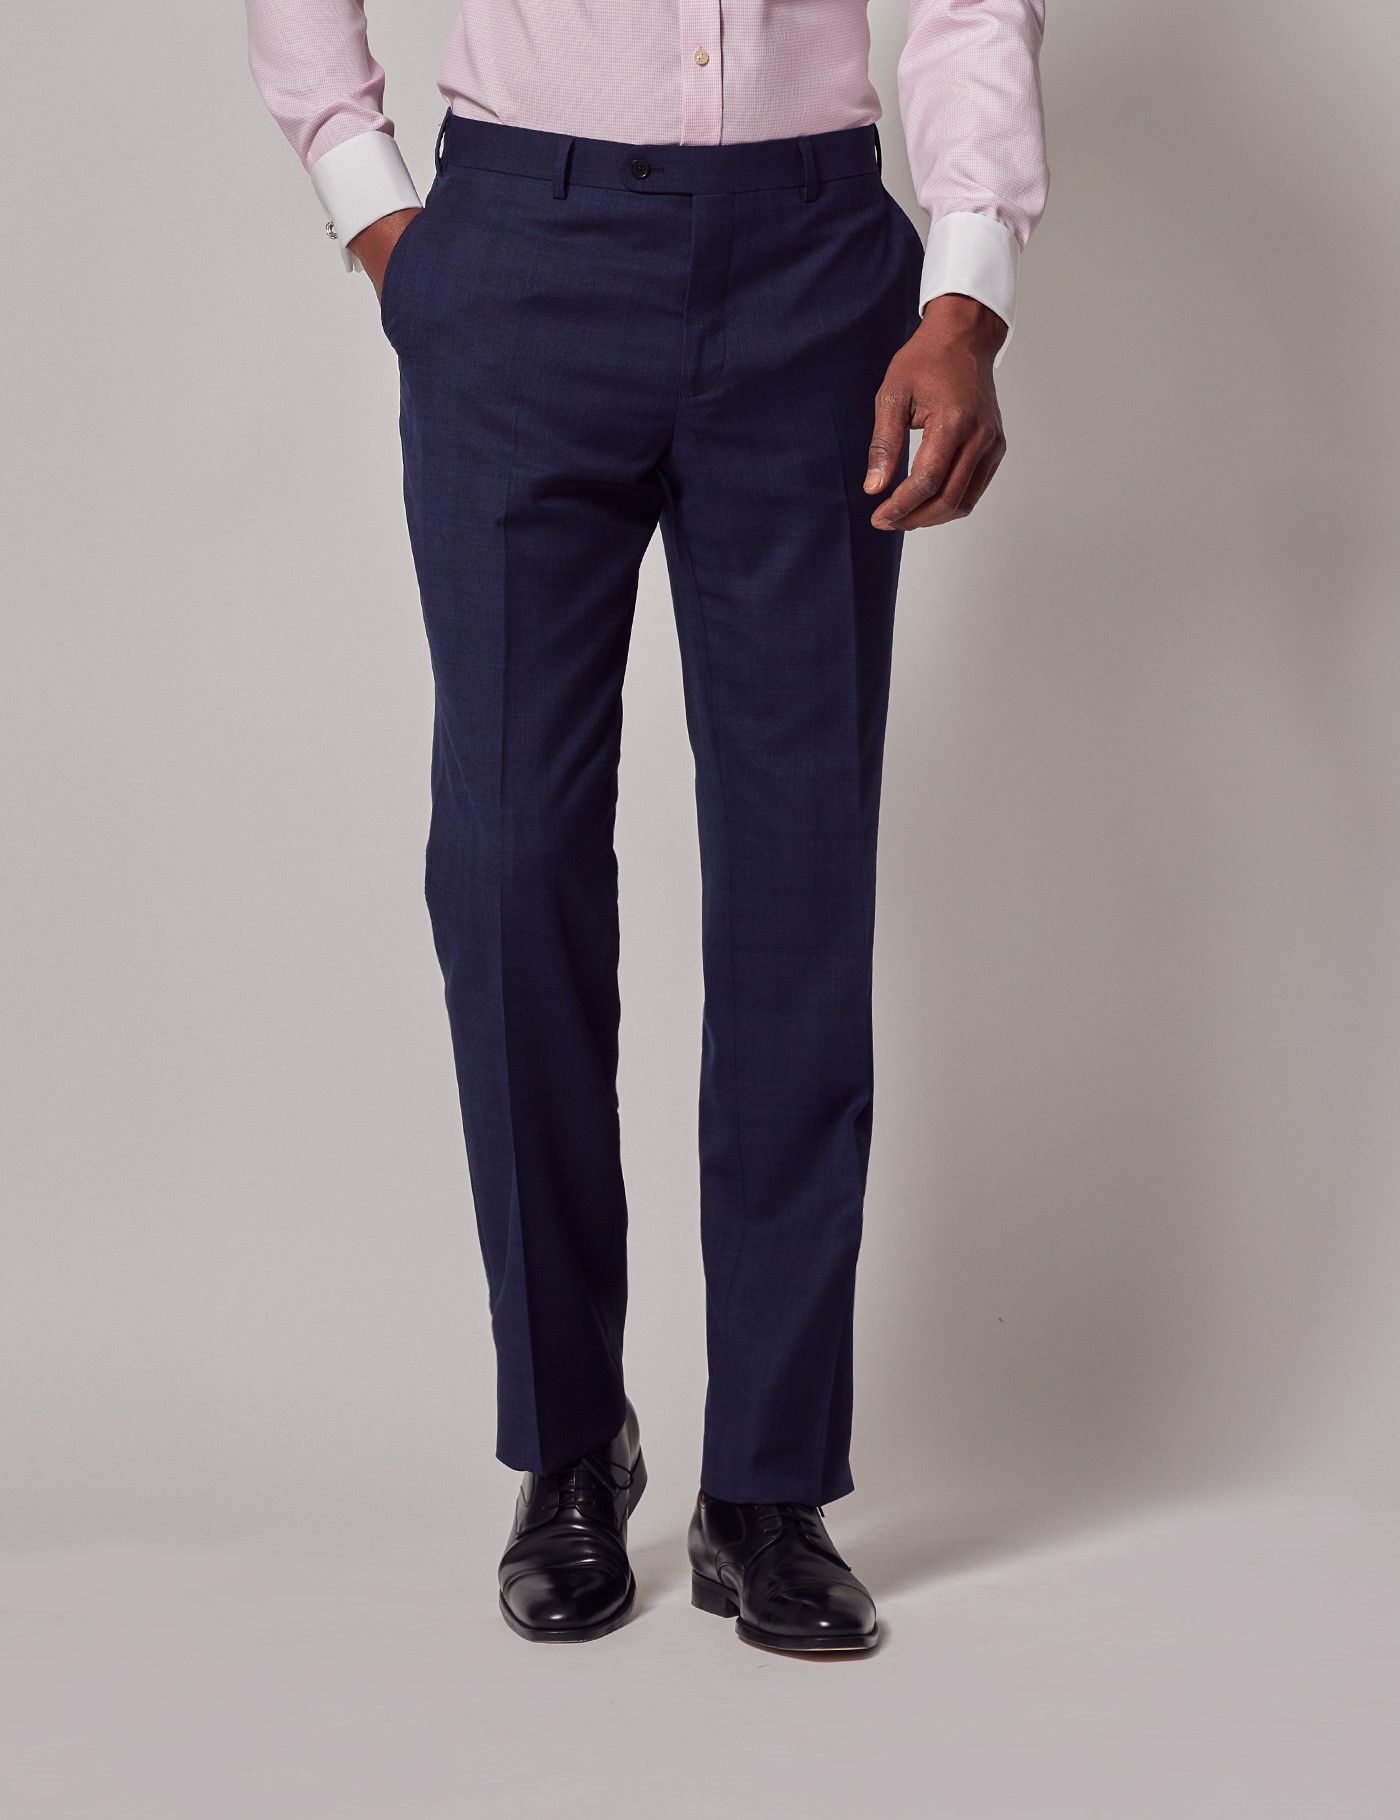 Men's Navy & Red Prince of Wales Check Classic Suit Trousers